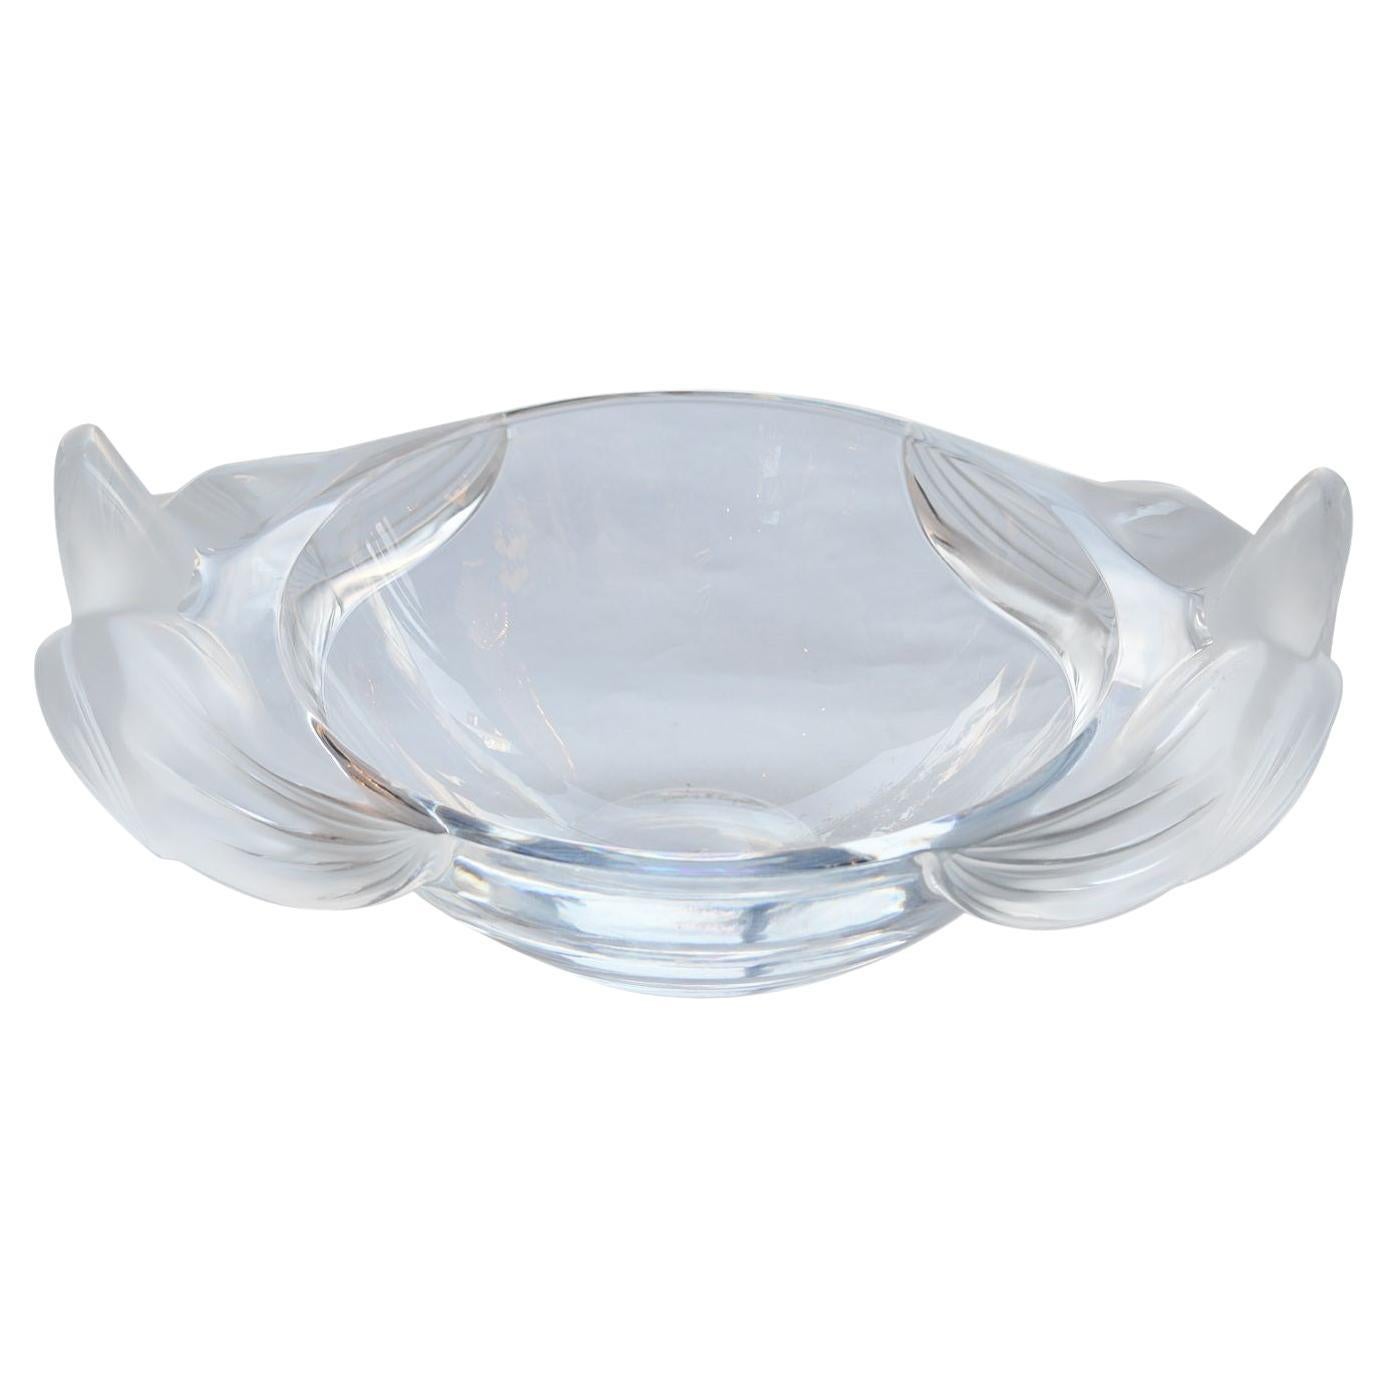 Signed French Lalique Glass Bowl with Flowered Details